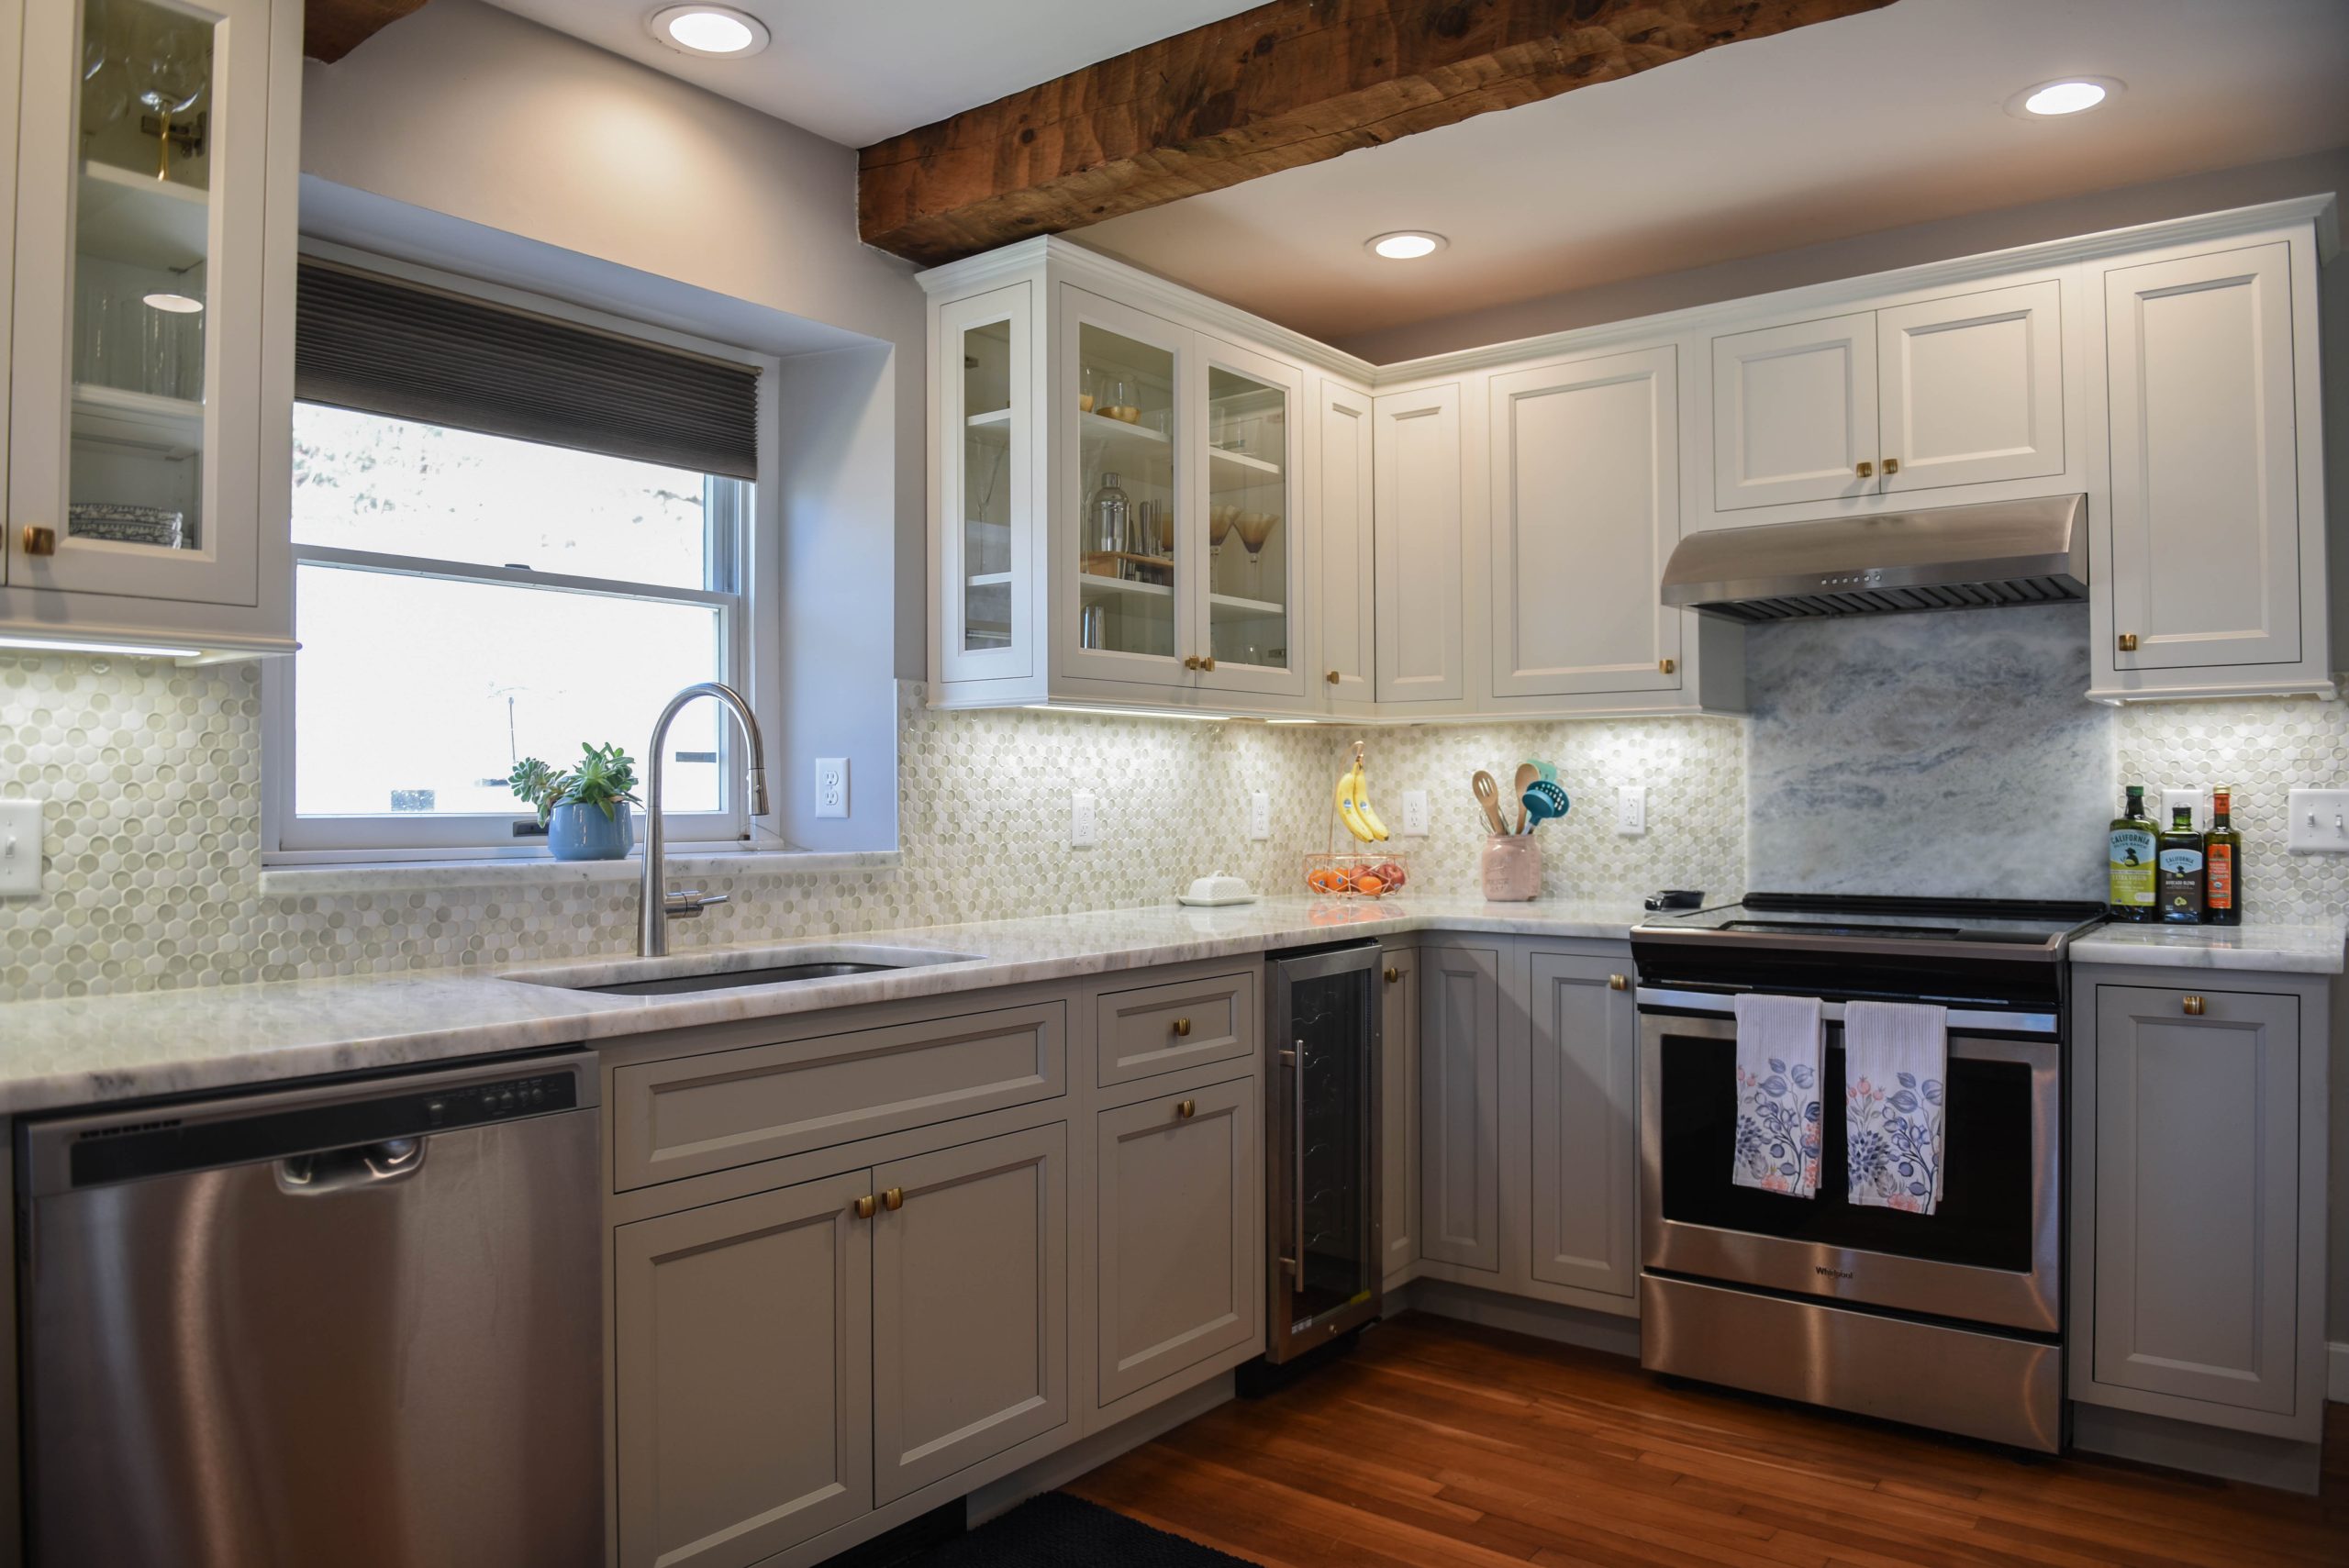 Maximizing Your Small Apartment Kitchen: Functional Countertop Appliances